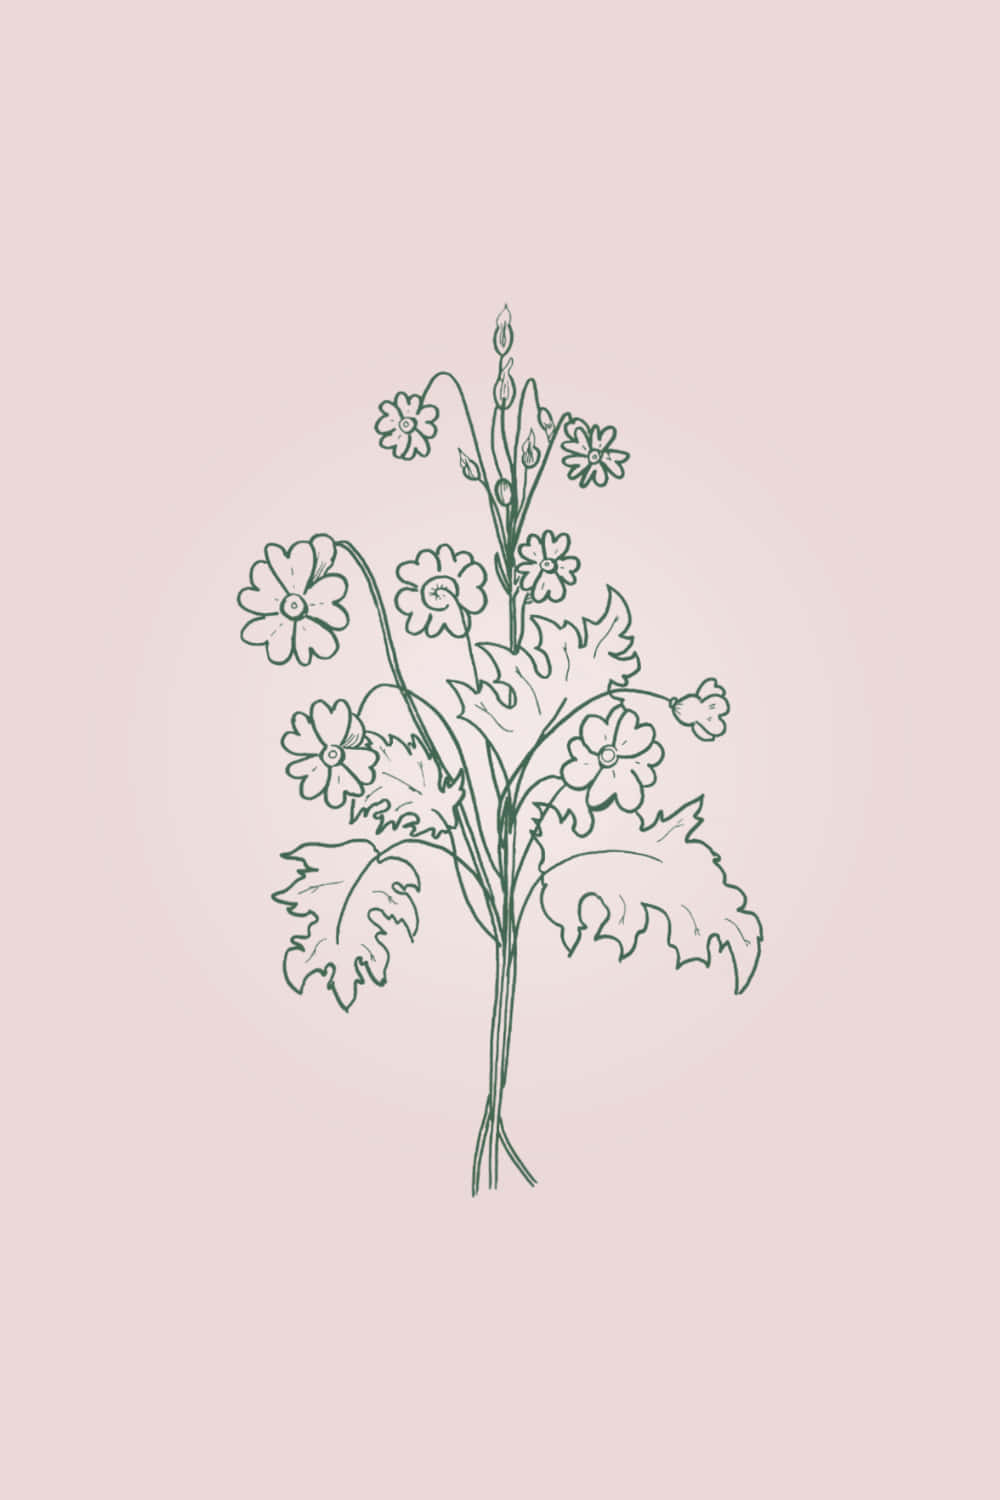 A Plant With Flowers On A Pink Background Wallpaper